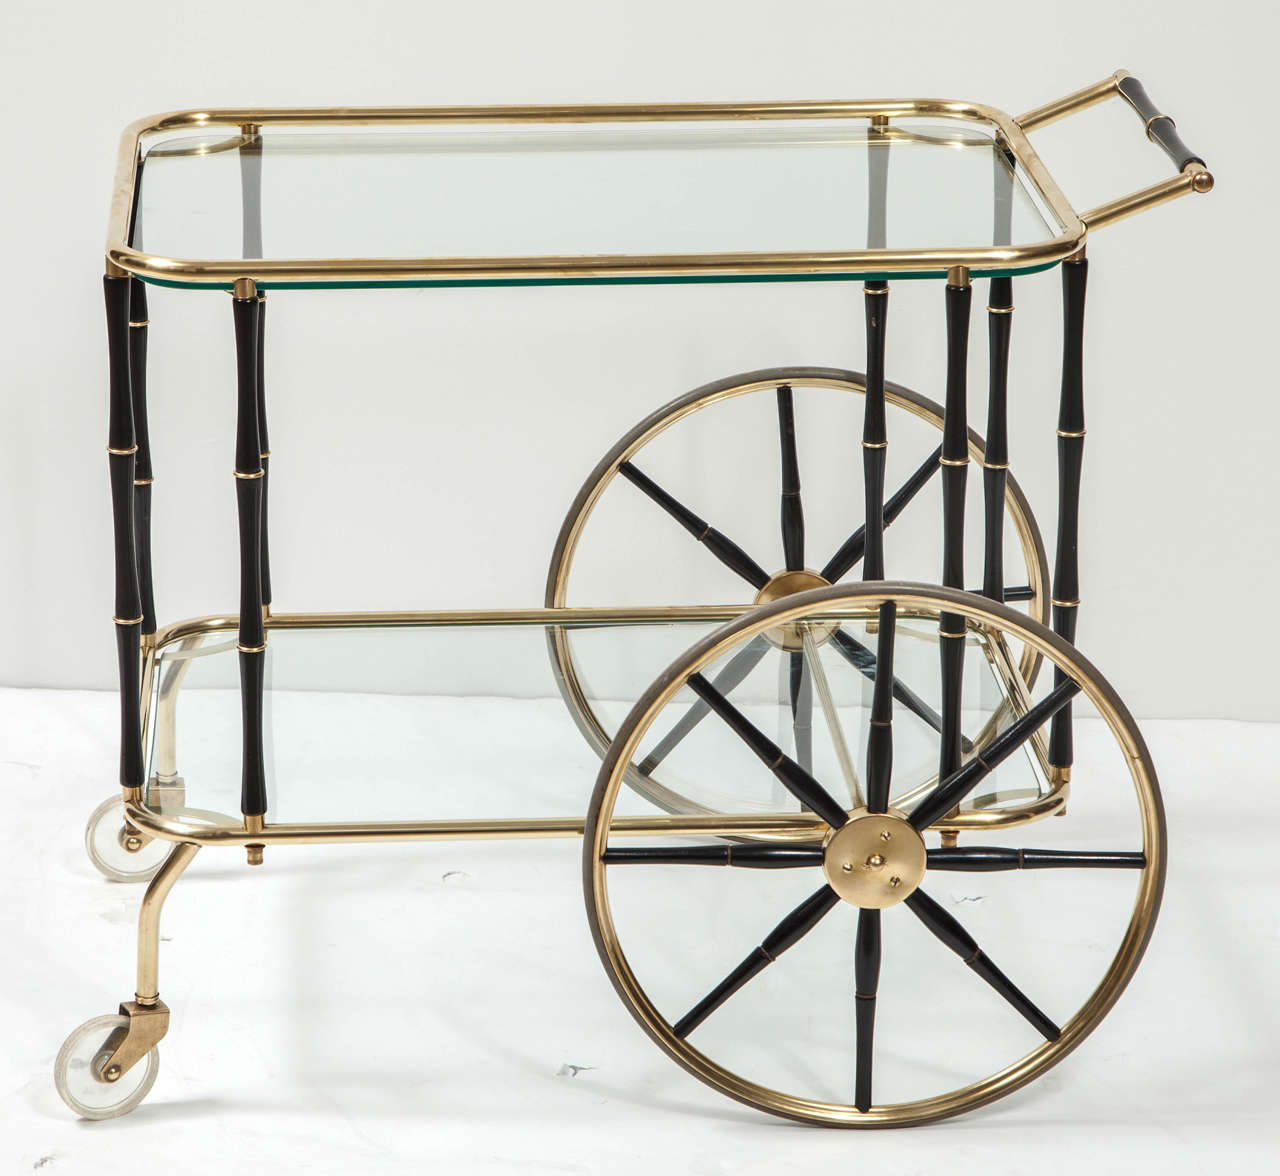 Decorative brass bar cart with black lacquer details, C 1950. Very good condition.